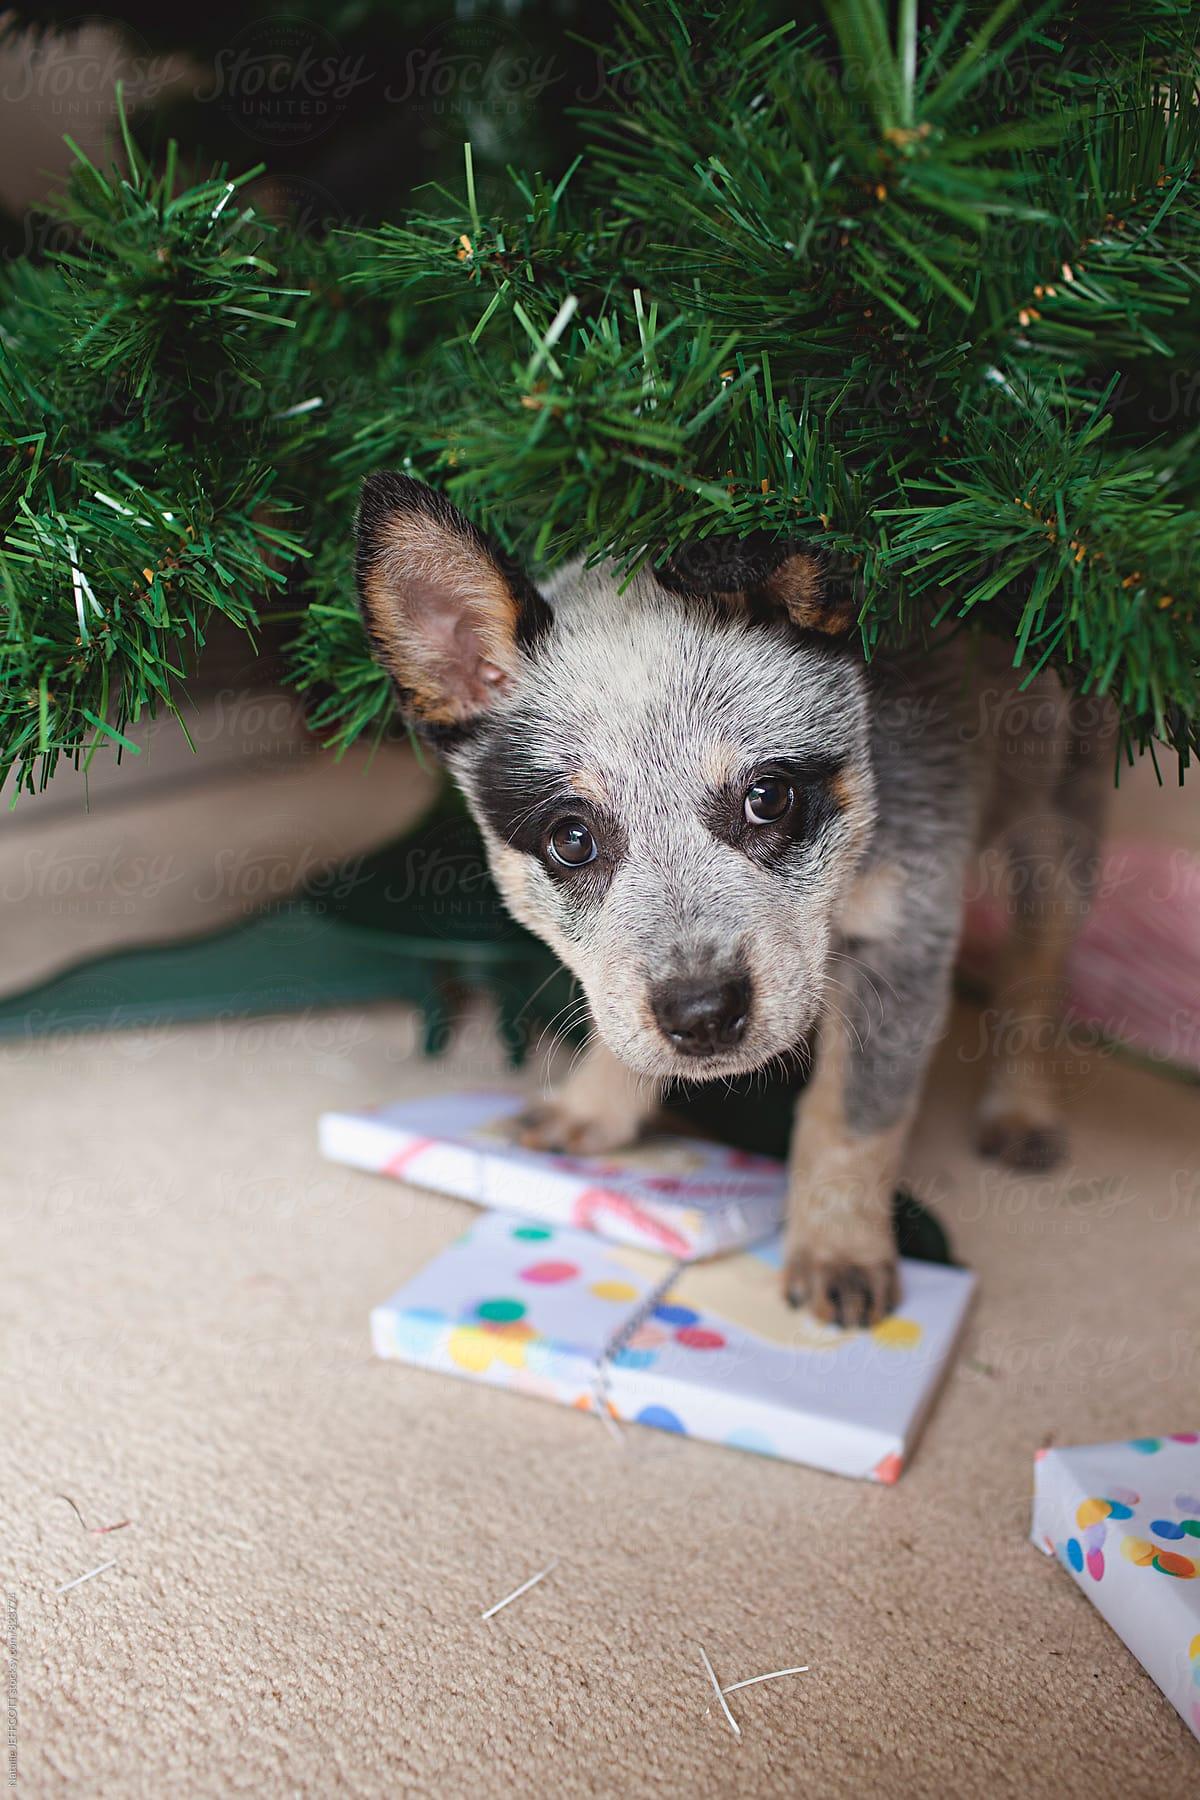 A young Blue Heeler puppy dog underneath the Christmas tree